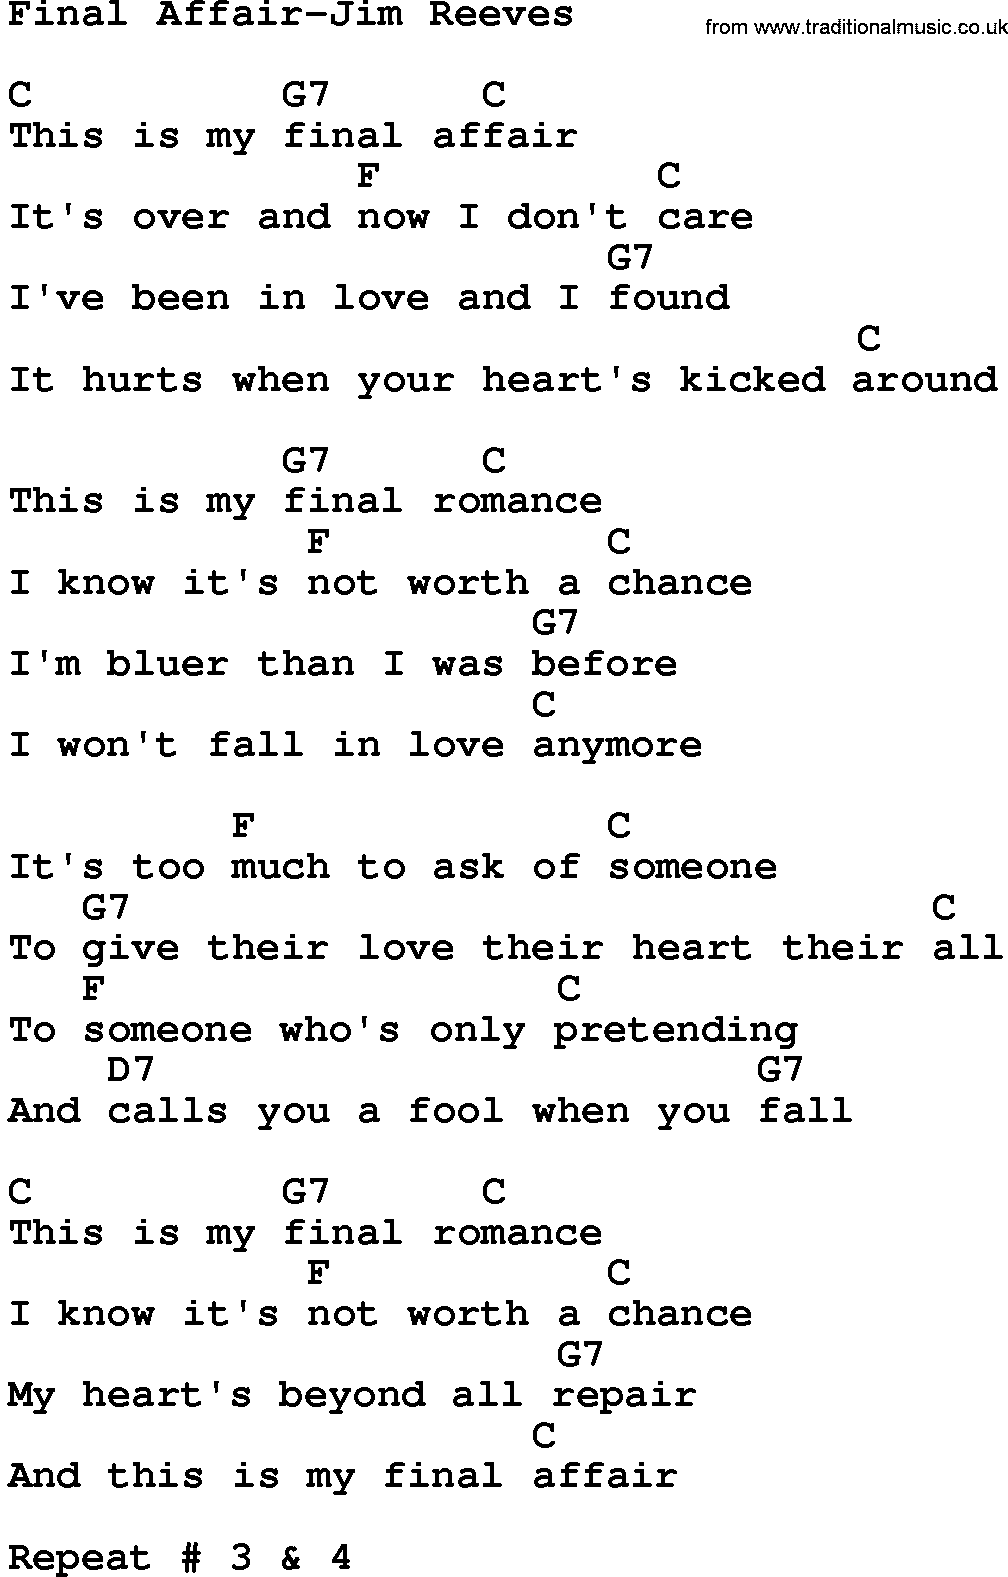 Country music song: Final Affair-Jim Reeves lyrics and chords